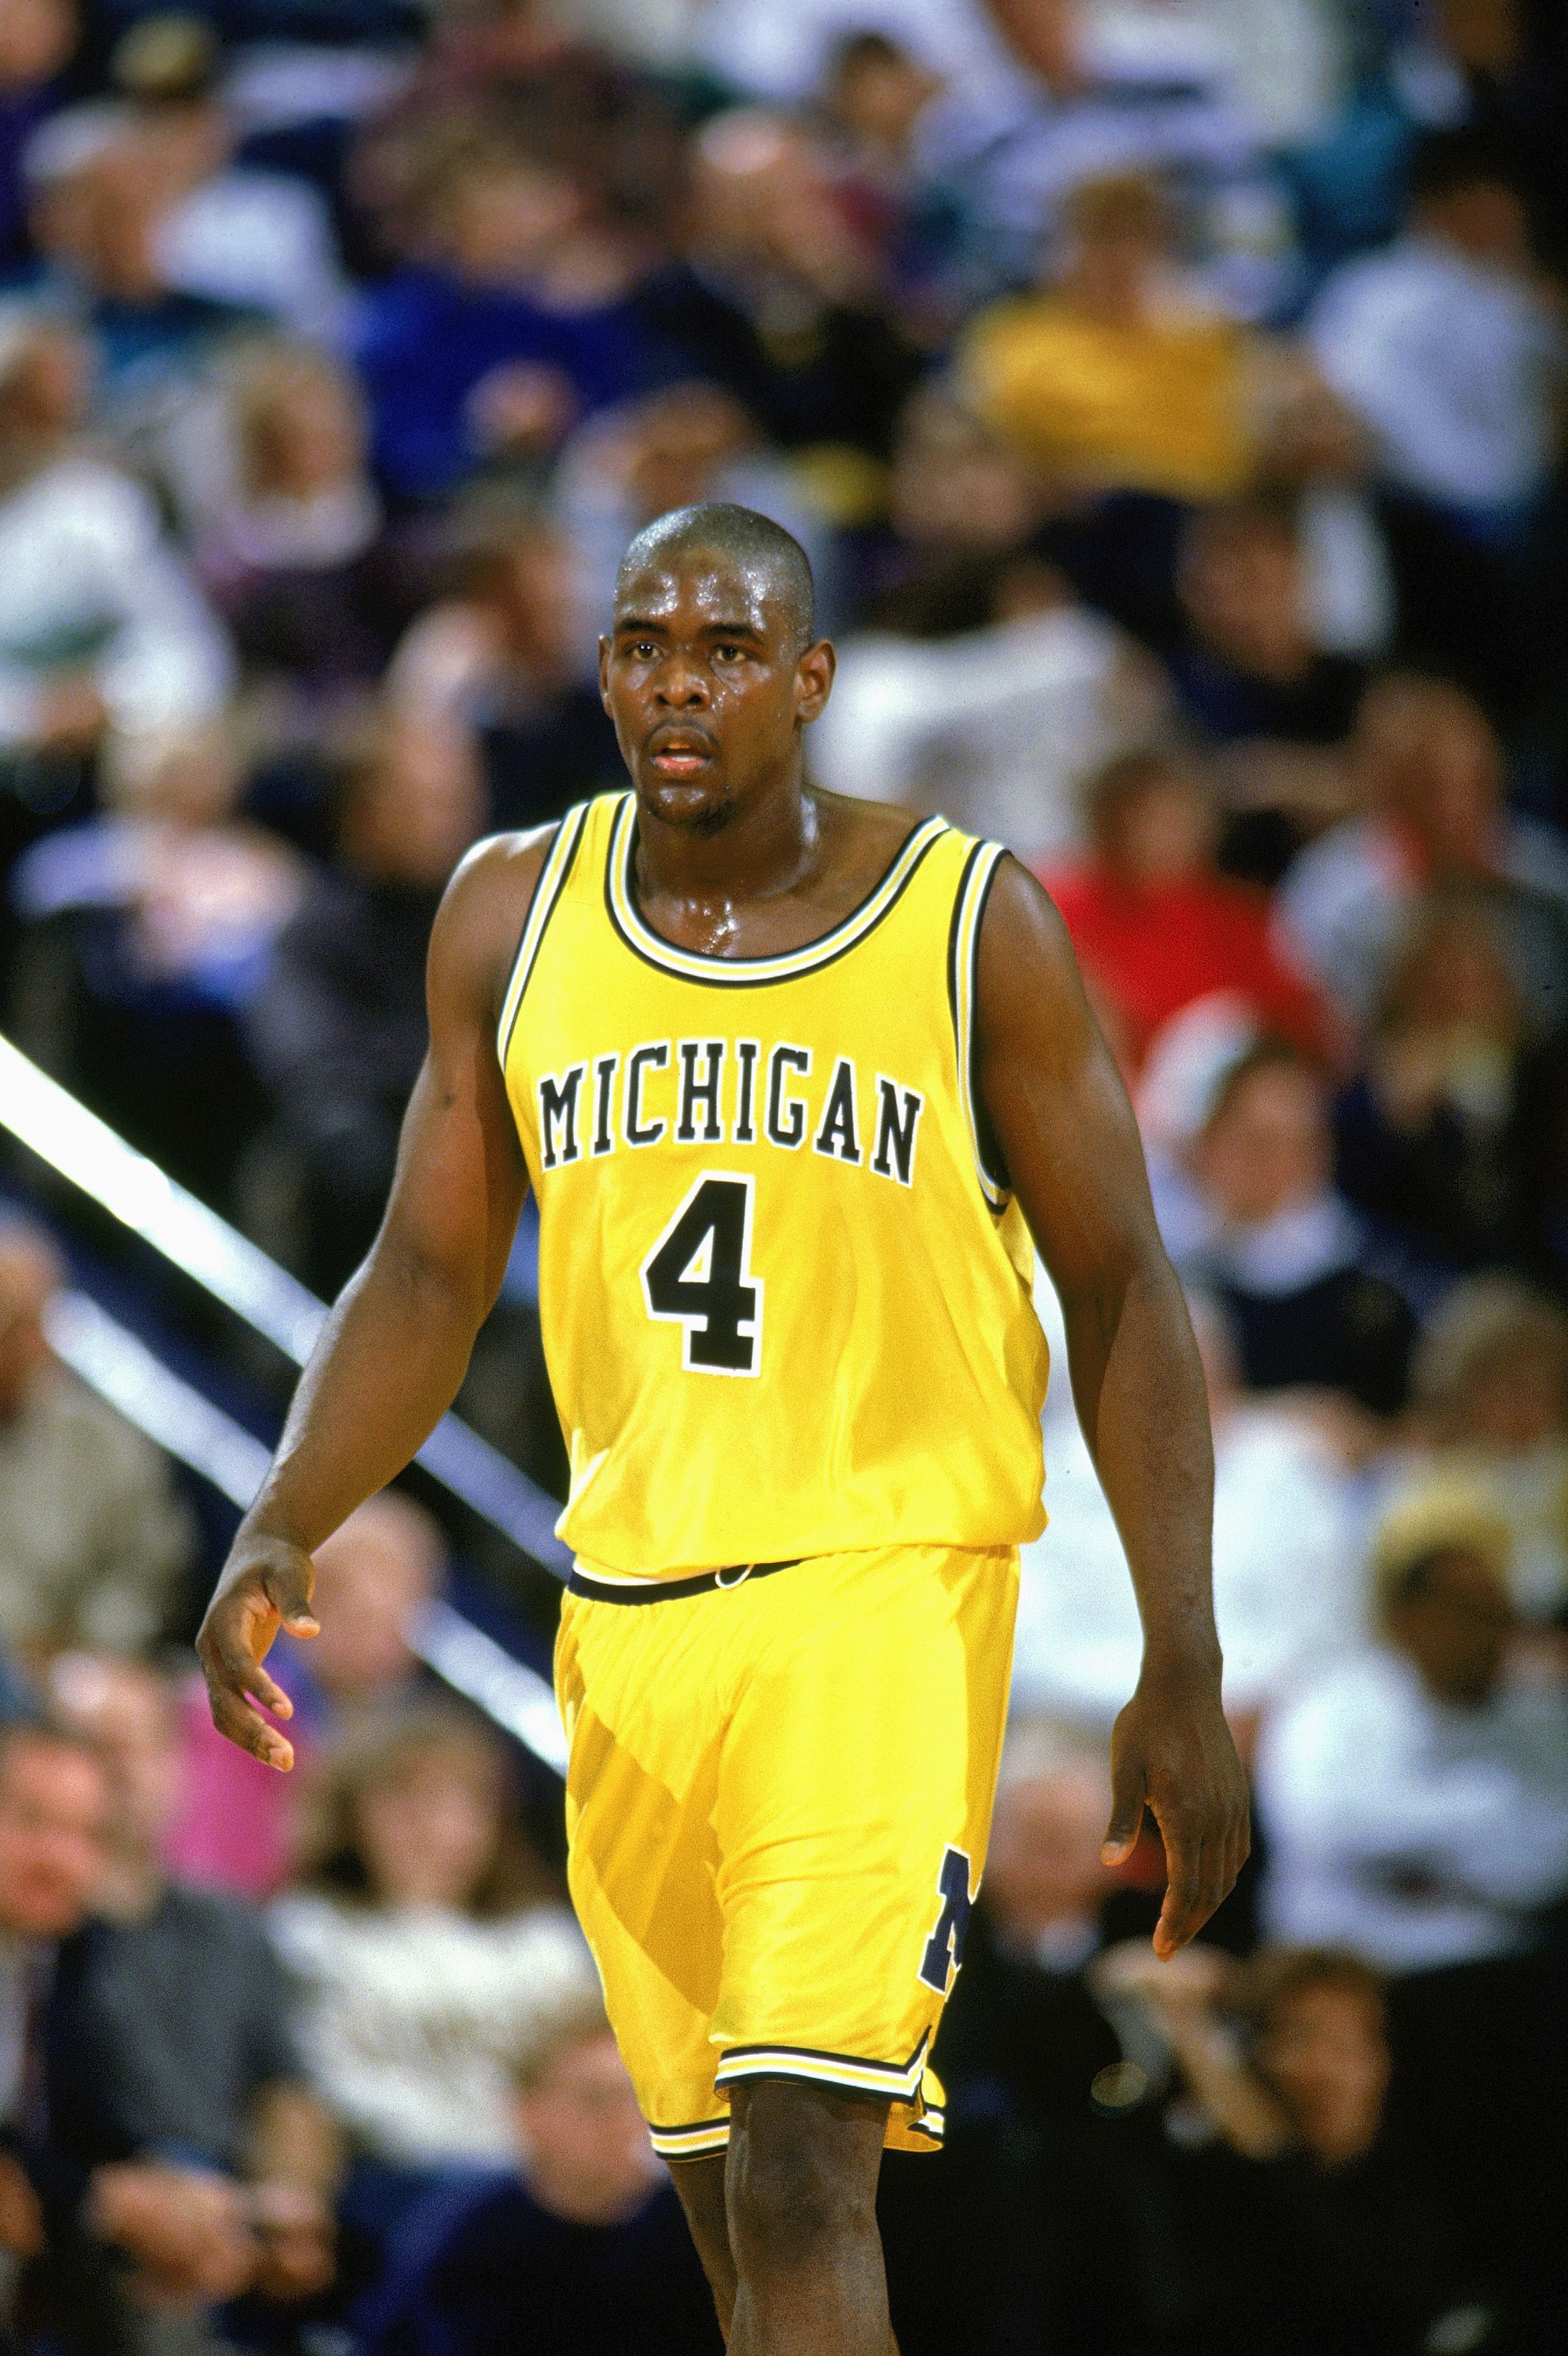 4. Chris Webber (1991-93): The centerpiece of the famed " Fab Five " recruiting class, Webber made a mark on the program — both good and bad. The 6-foot-9 forward powered Michigan to back-to-back national title game appearances in 1992 and 1993 and averaged 19.2 points, 10.1 rebounds and 2.5 blocks as a sophomore, becoming one of five Wolverines to earn consensus All-American first-team honors. He would go on to become the top pick in 1993 NBA Draft, but his involvement in the Ed Martin scandal led to a 10-year disassociation with the program that ended in 2013.